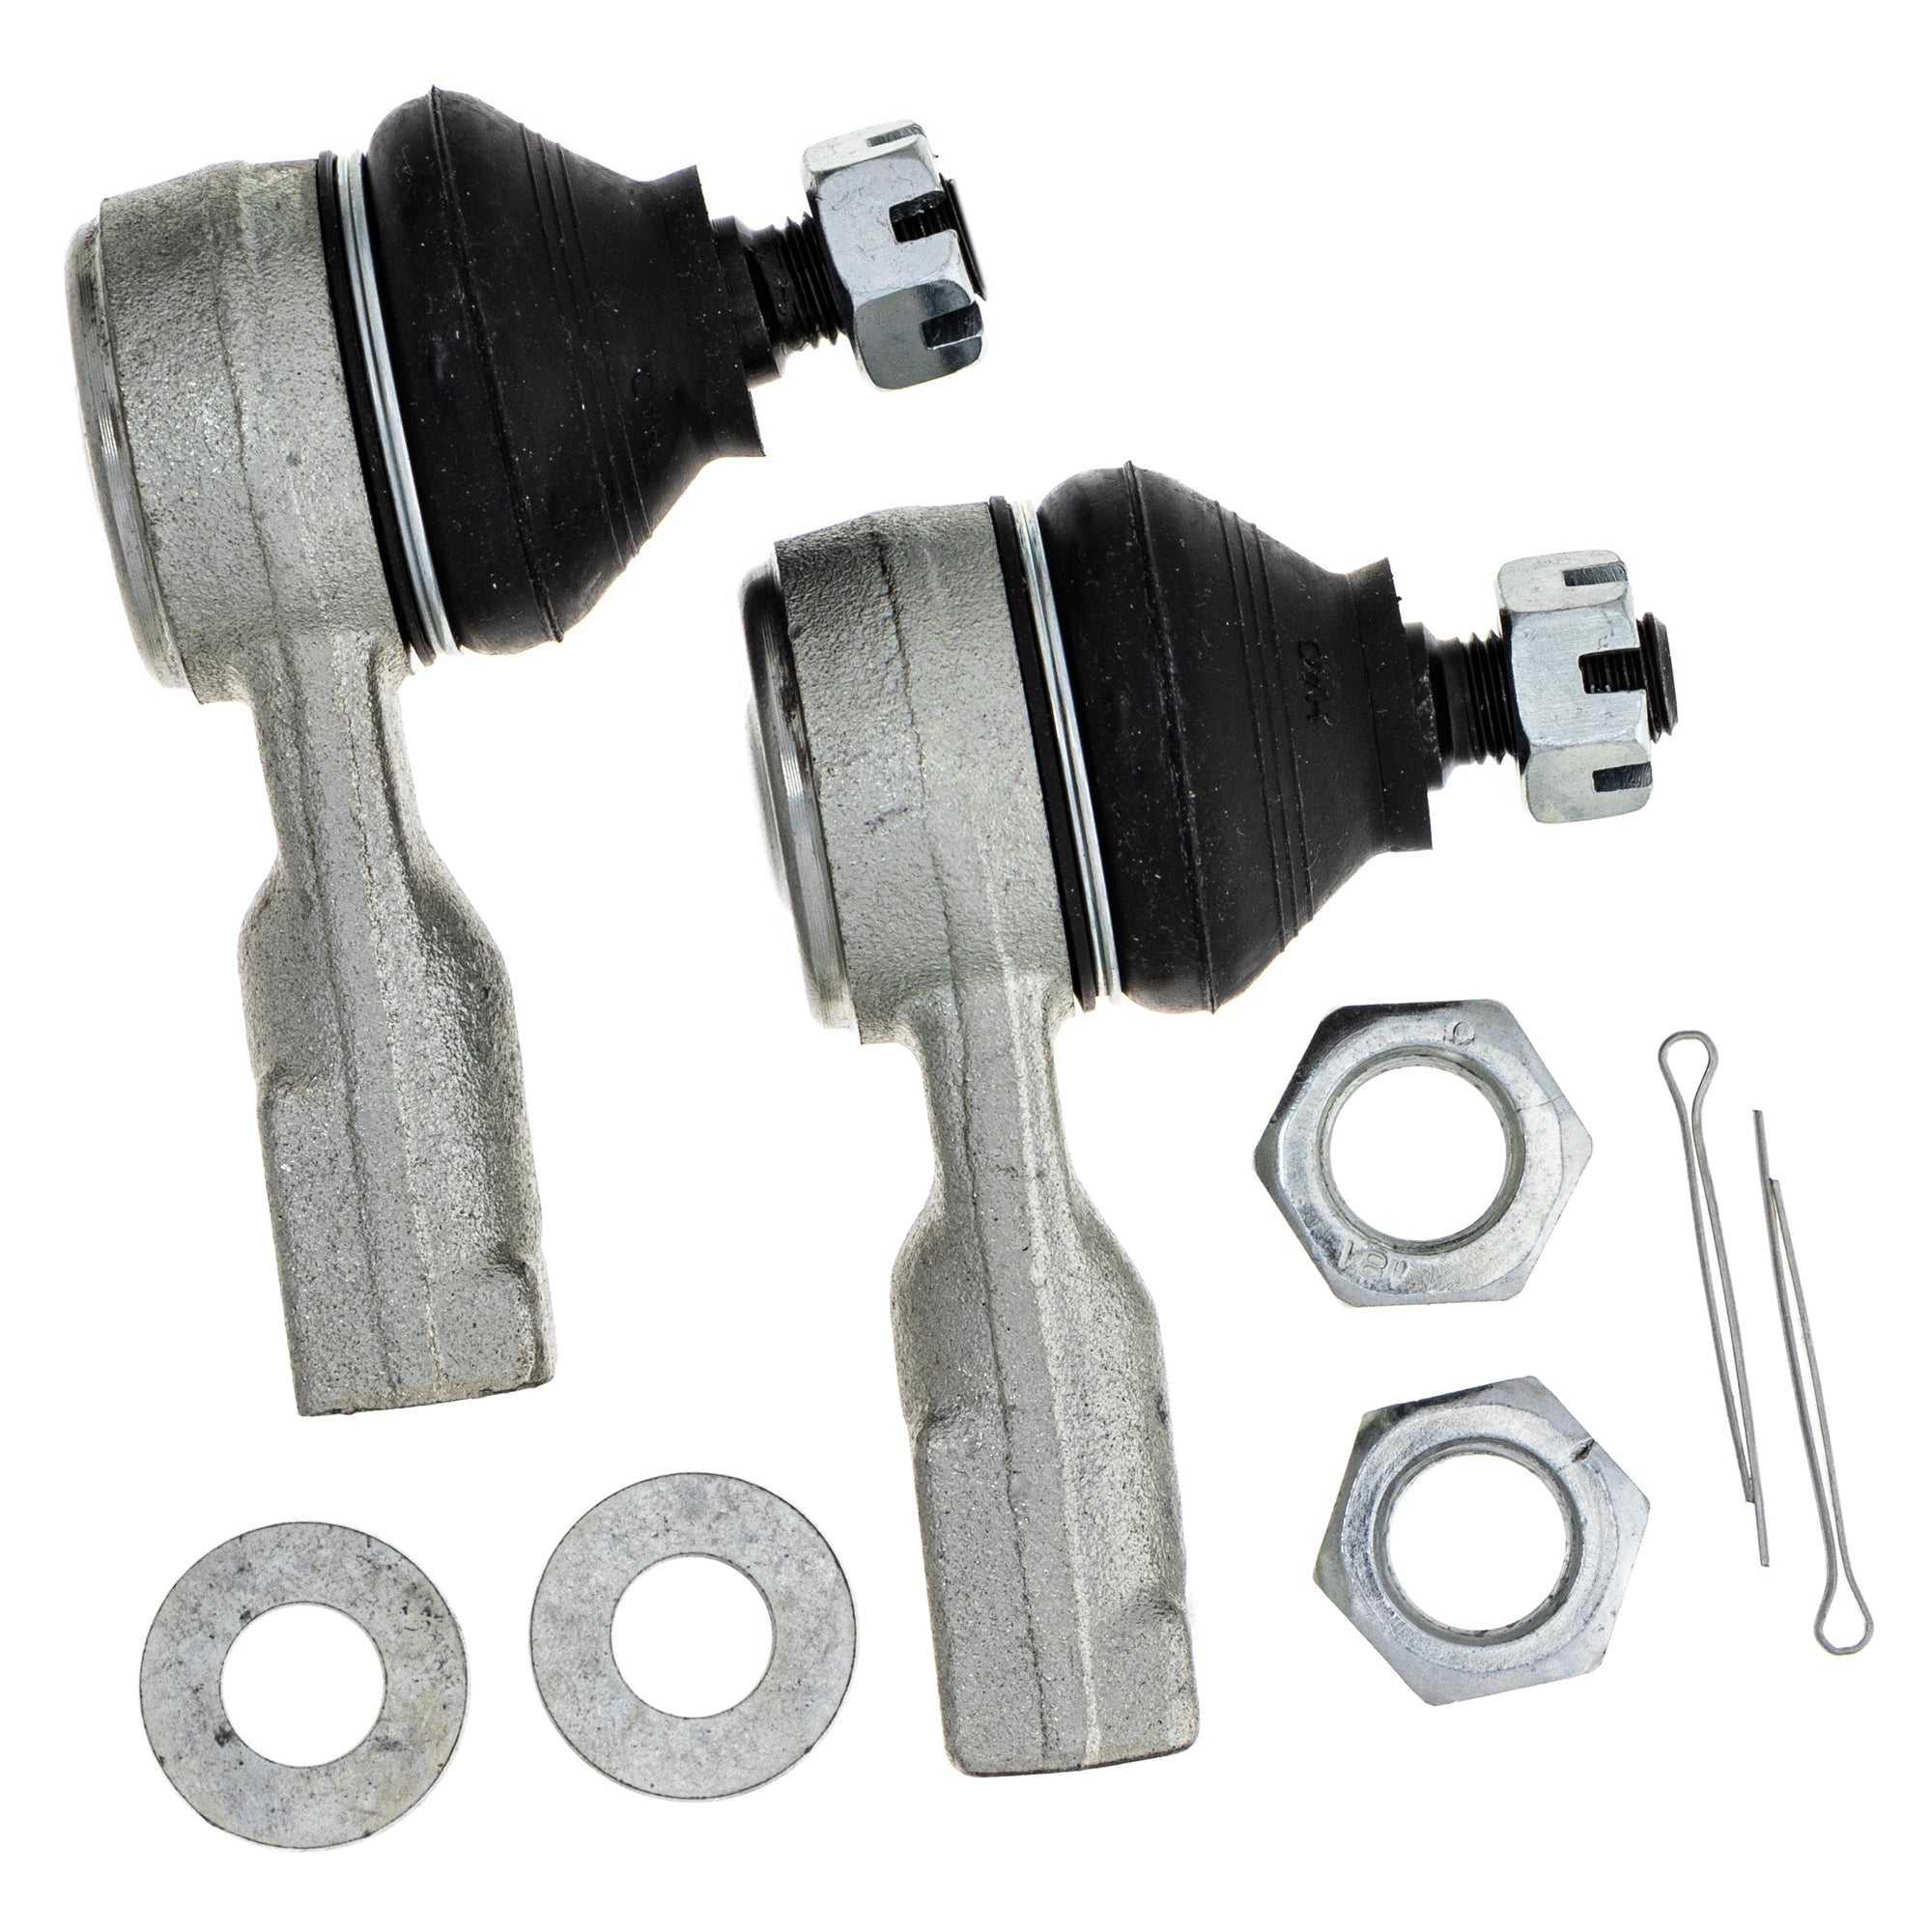 Tie Rod End Ball Joint Kit for BRP Can-Am Ski-Doo Sea-Doo Mule NICHE 519-KTR2240E